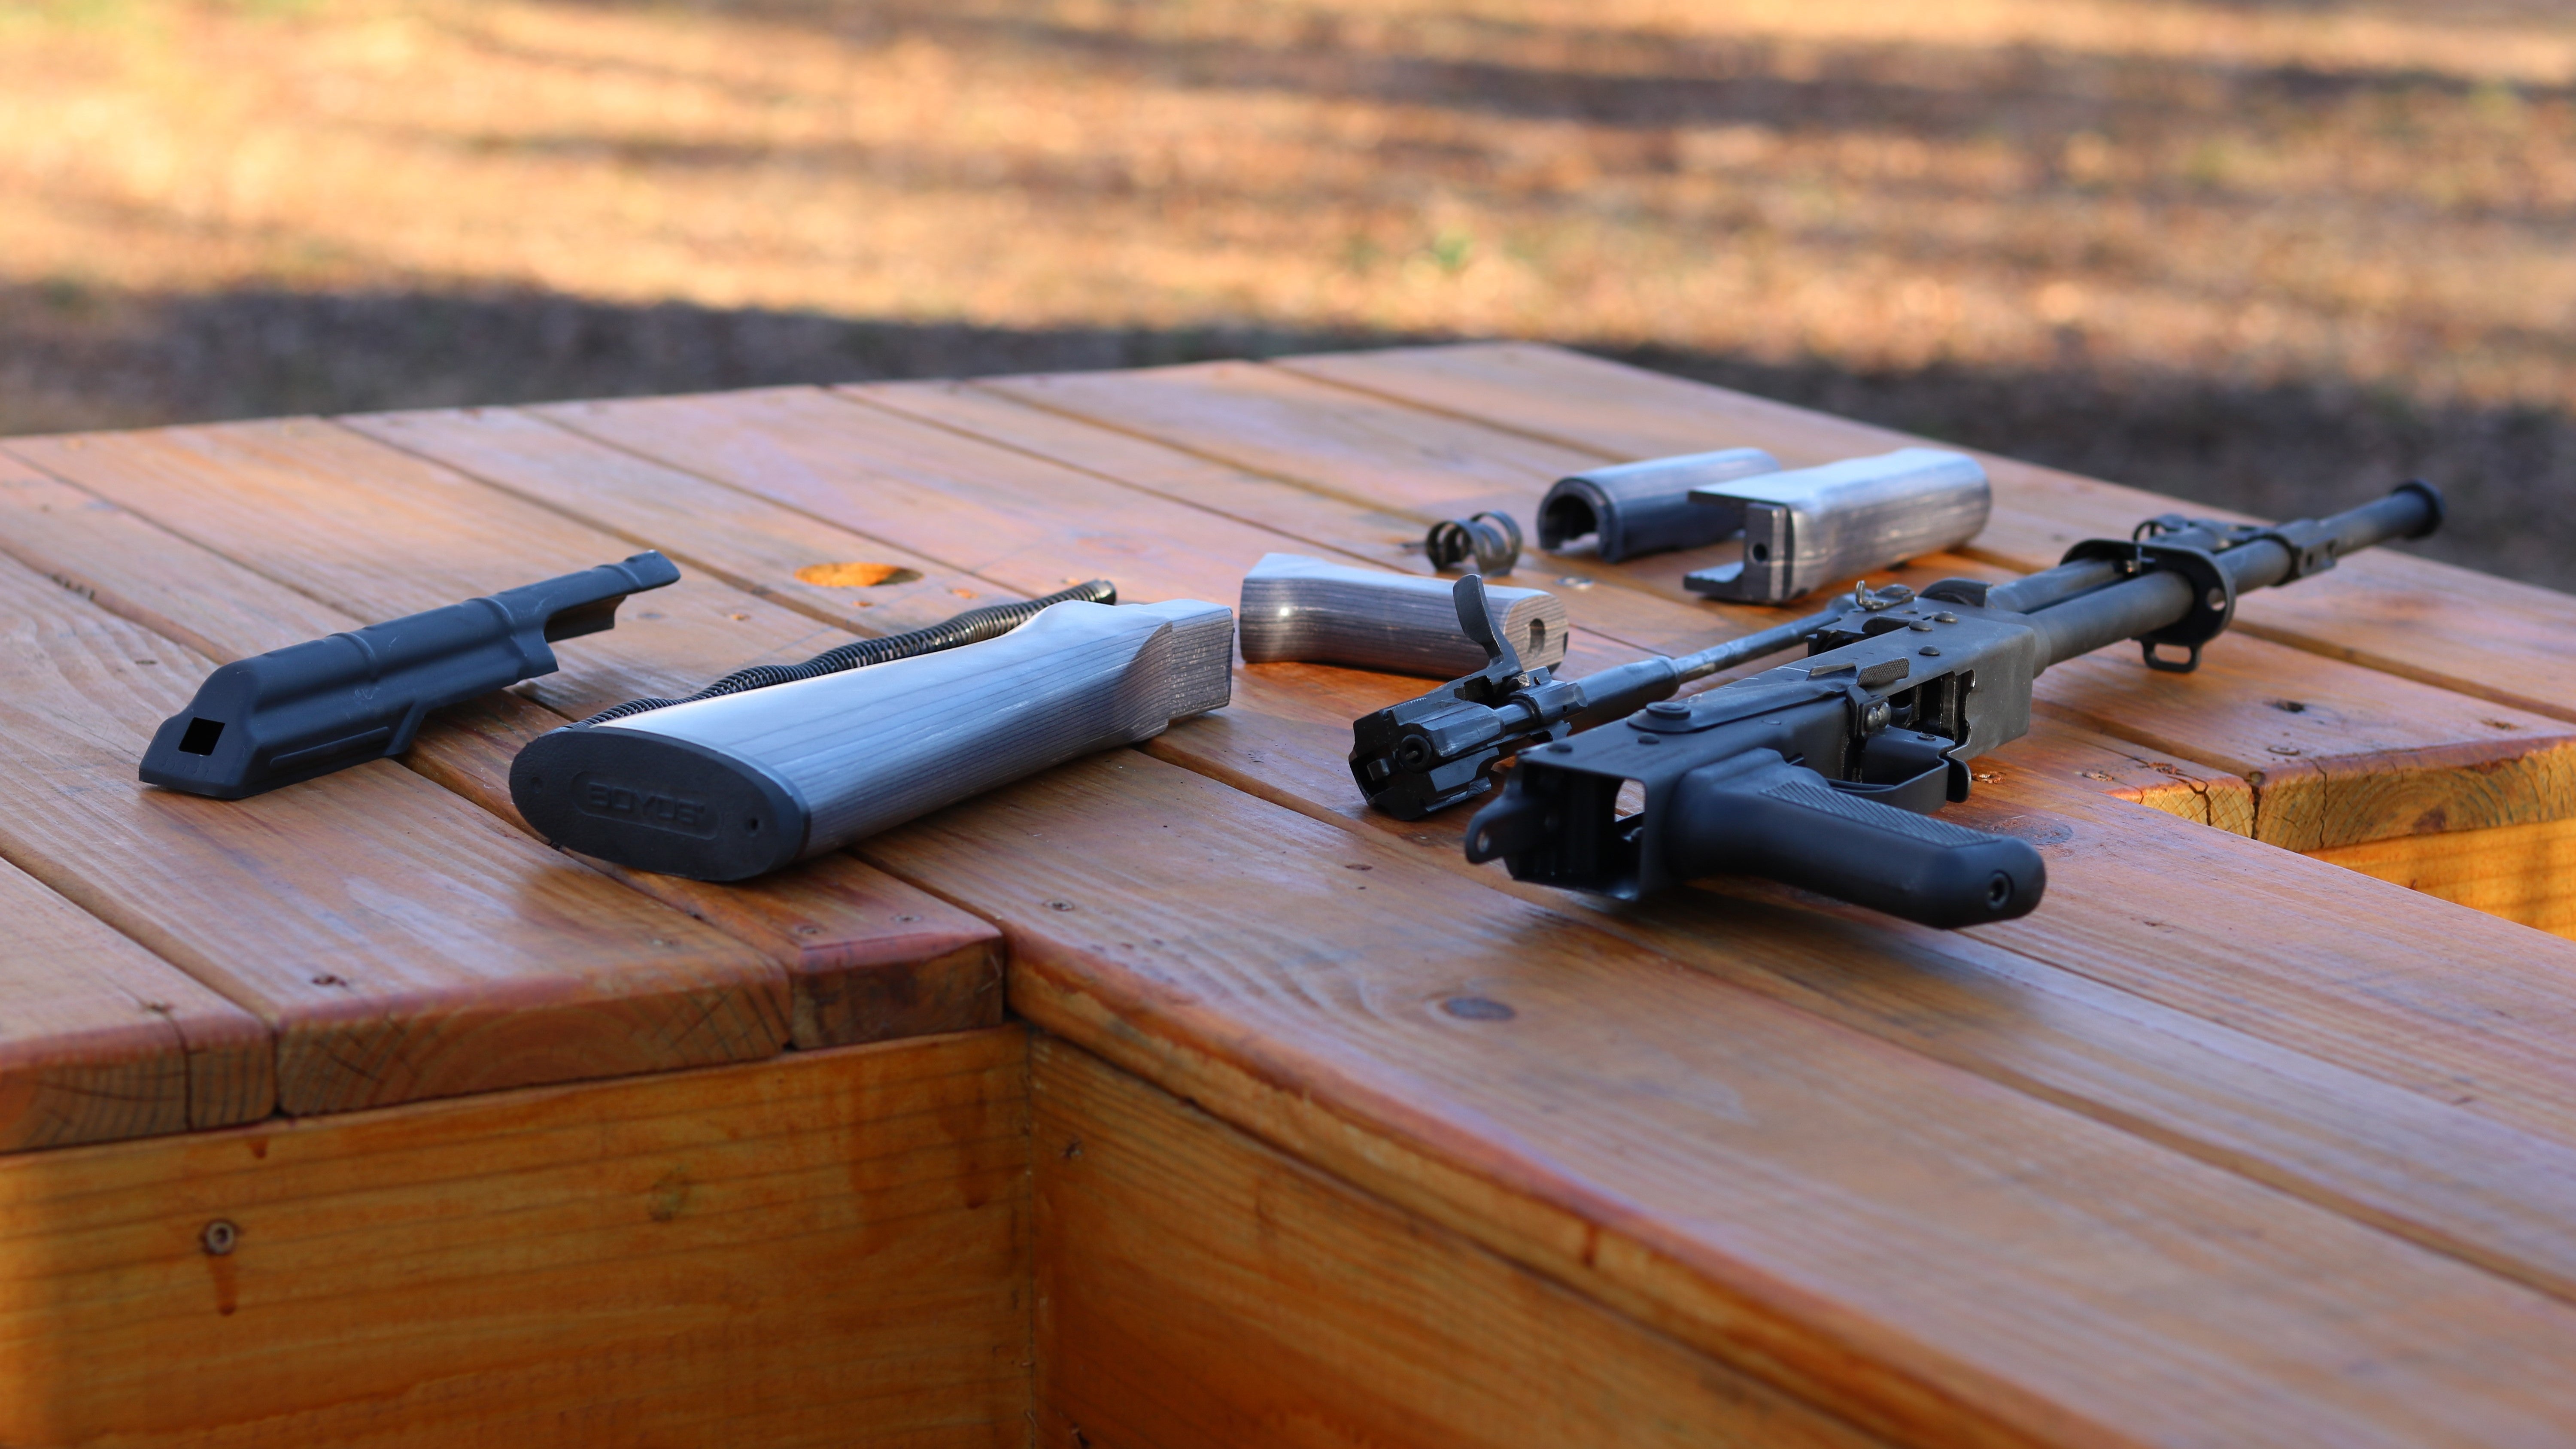 AllOutdoor Review: Boyds Gunstocks - Furniture for AR-15s and AKs